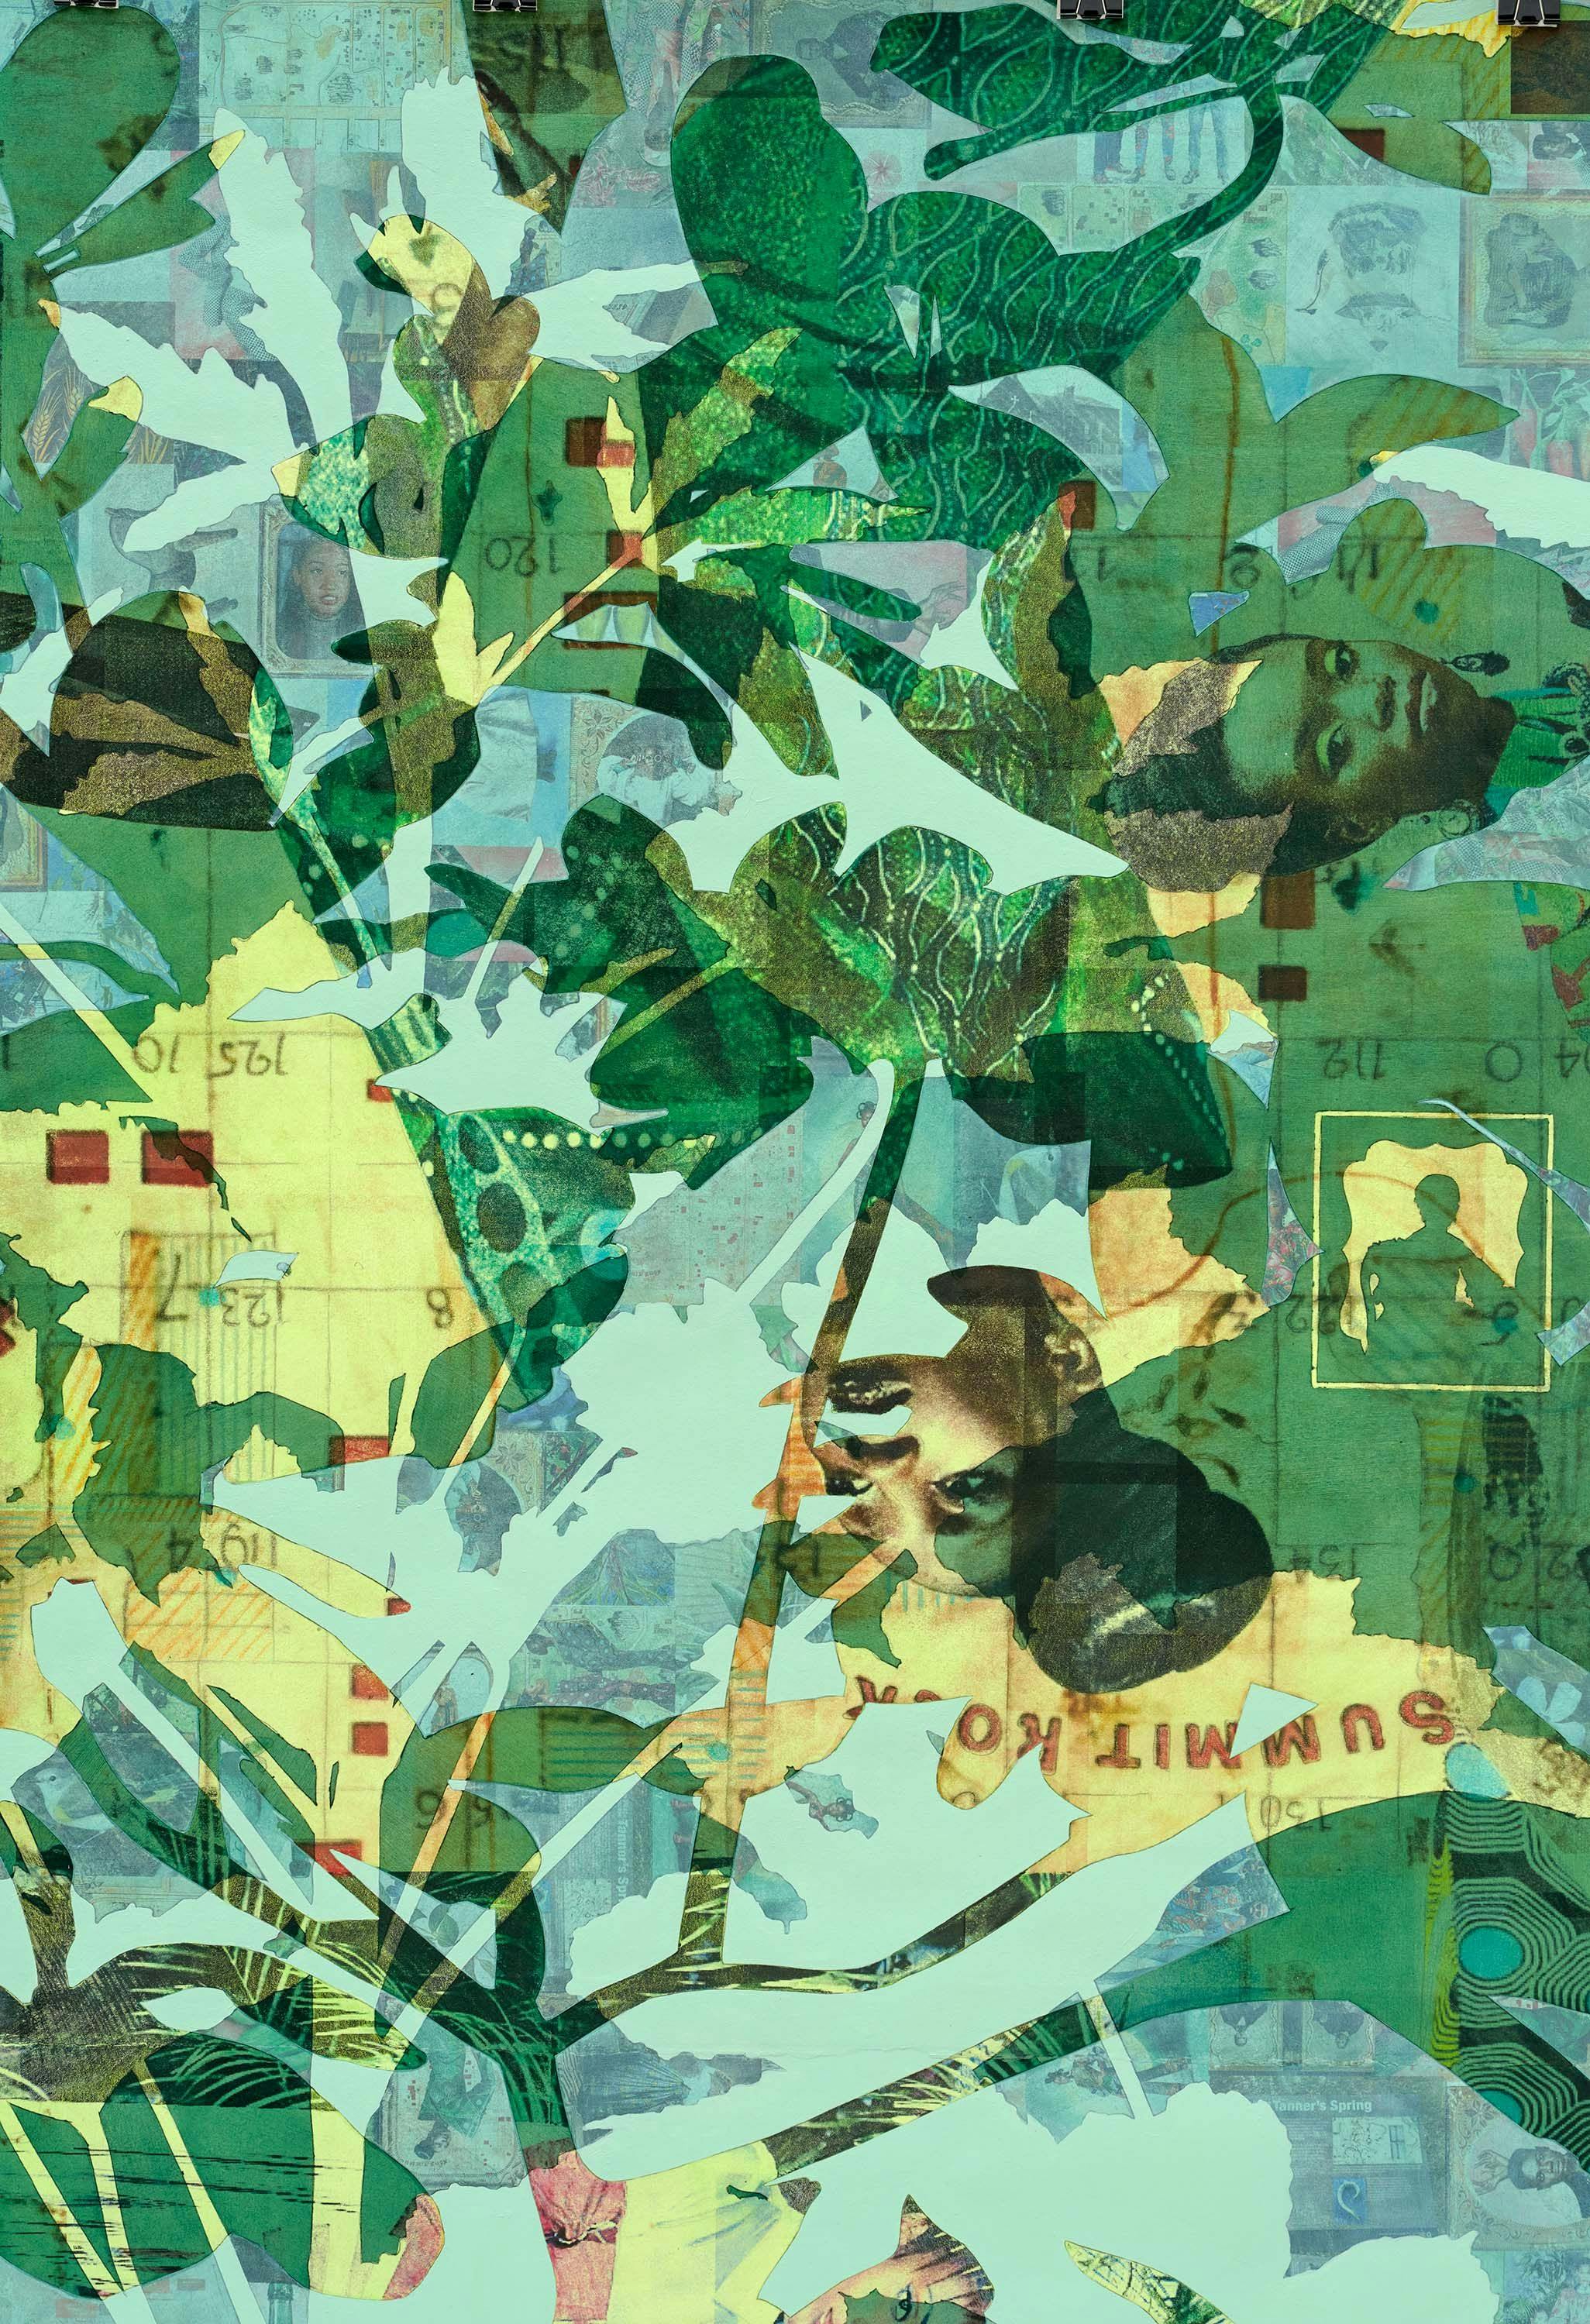 A detail from a work on paper by Njideka Akunyili Crosby, titled Potential, Displaced, dated 2021.